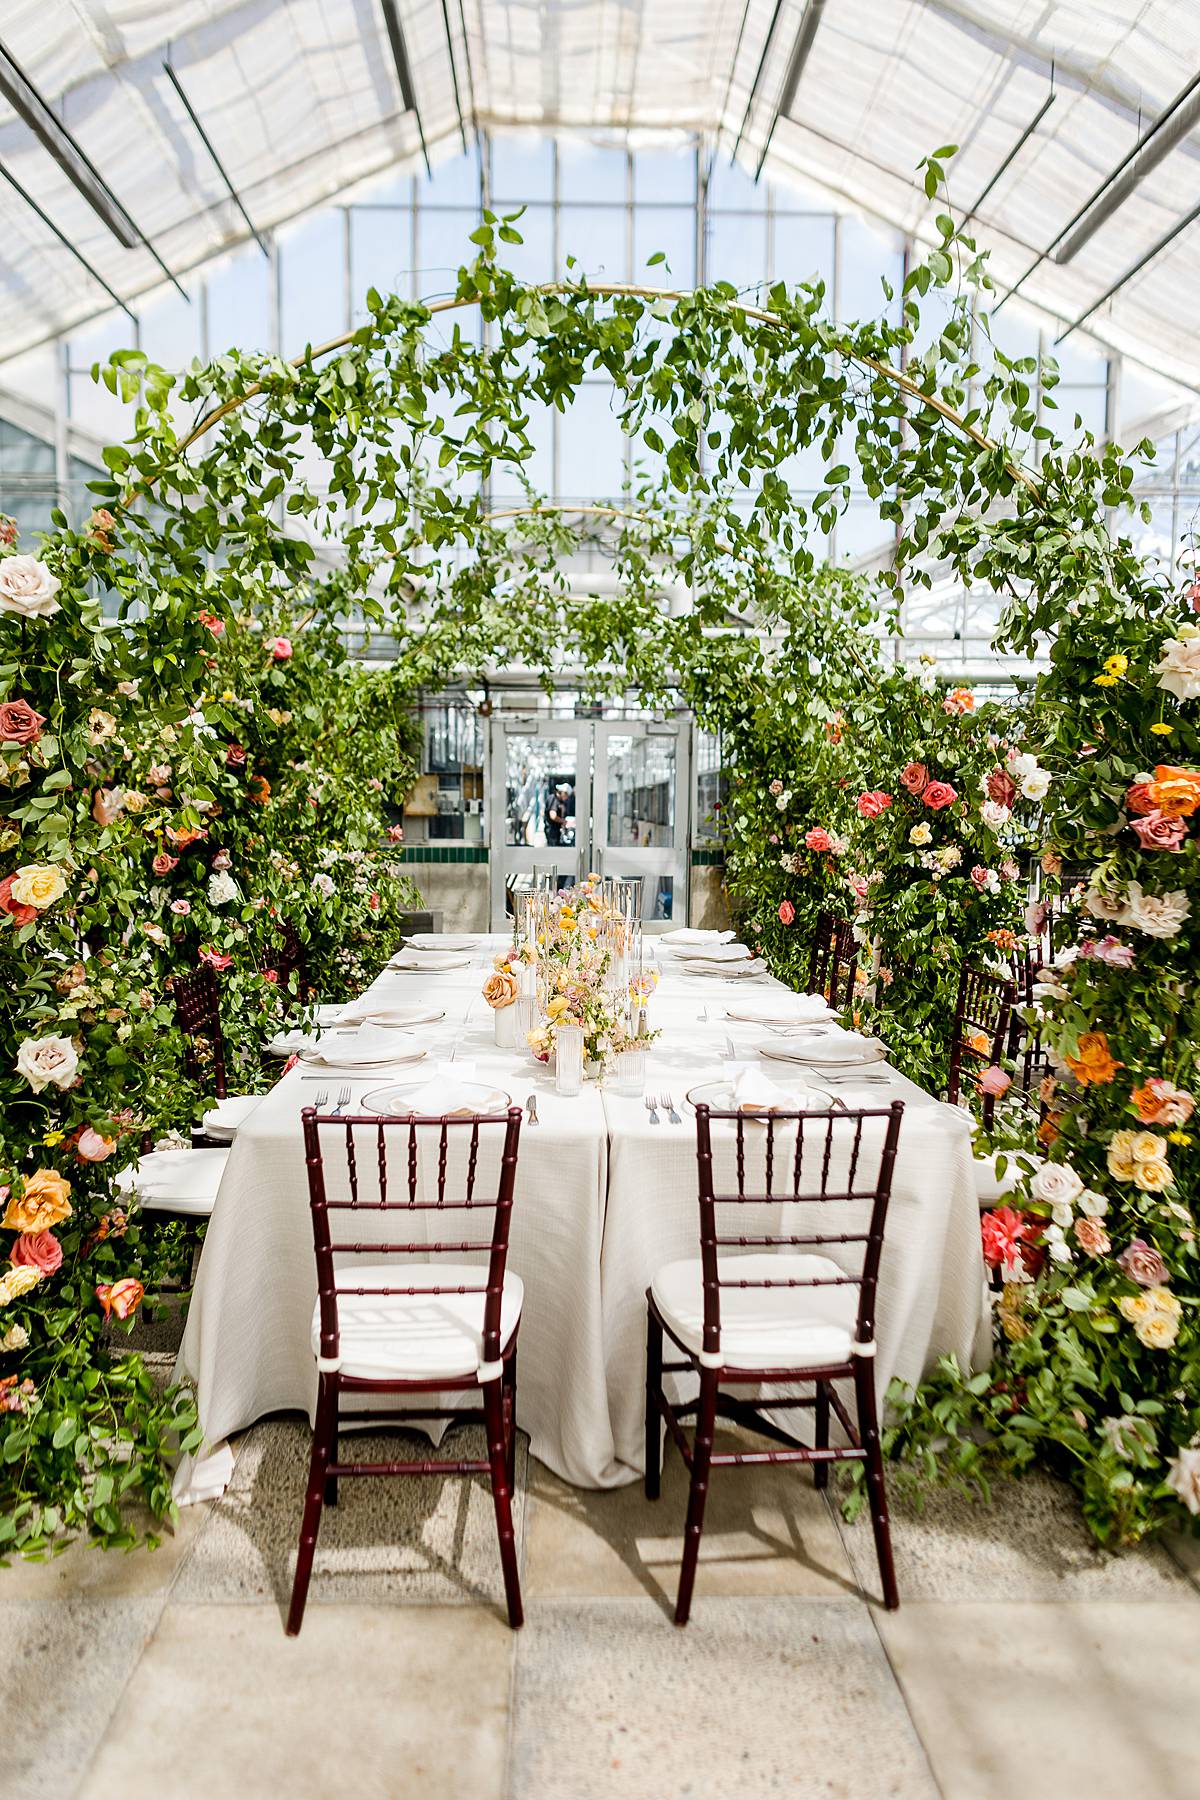 MSU wedding with incredible floral arch décor in the Michigan State University Horticulture Garden Greenhouse reception area